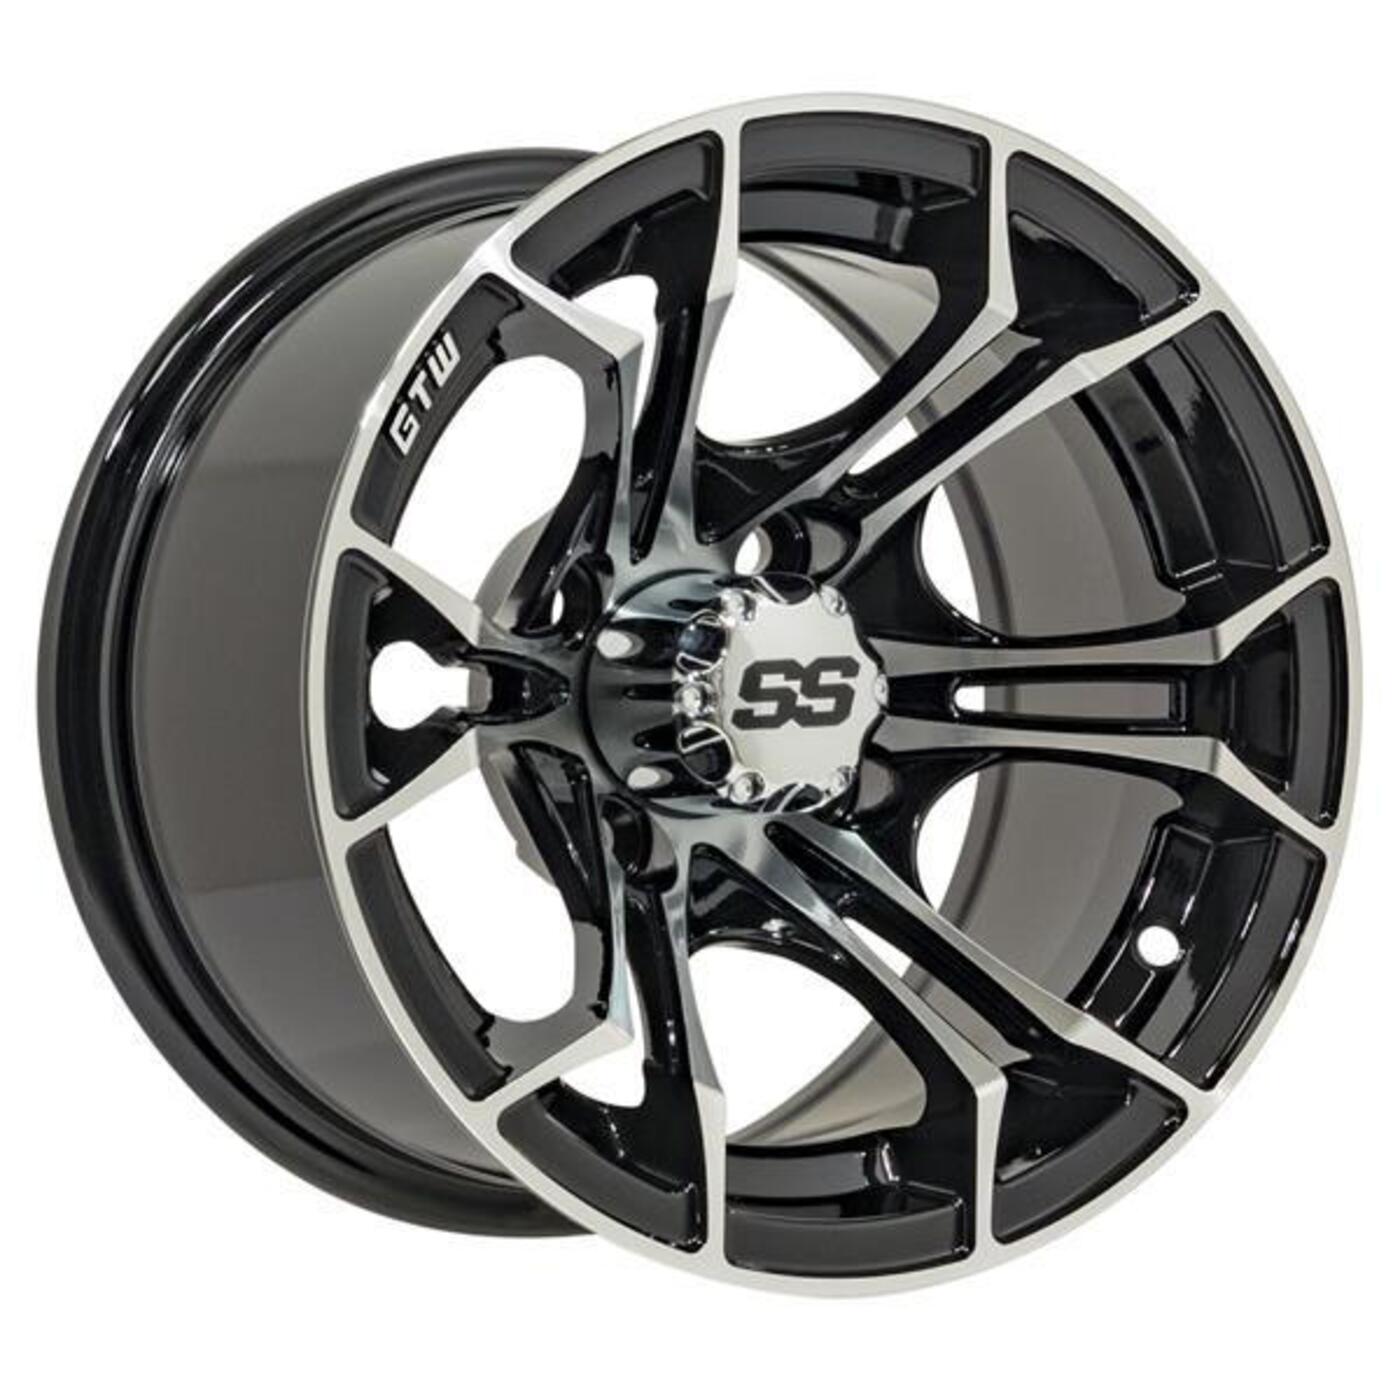 12" GTW Spyder Wheel - Black with Machined Accents 19-218